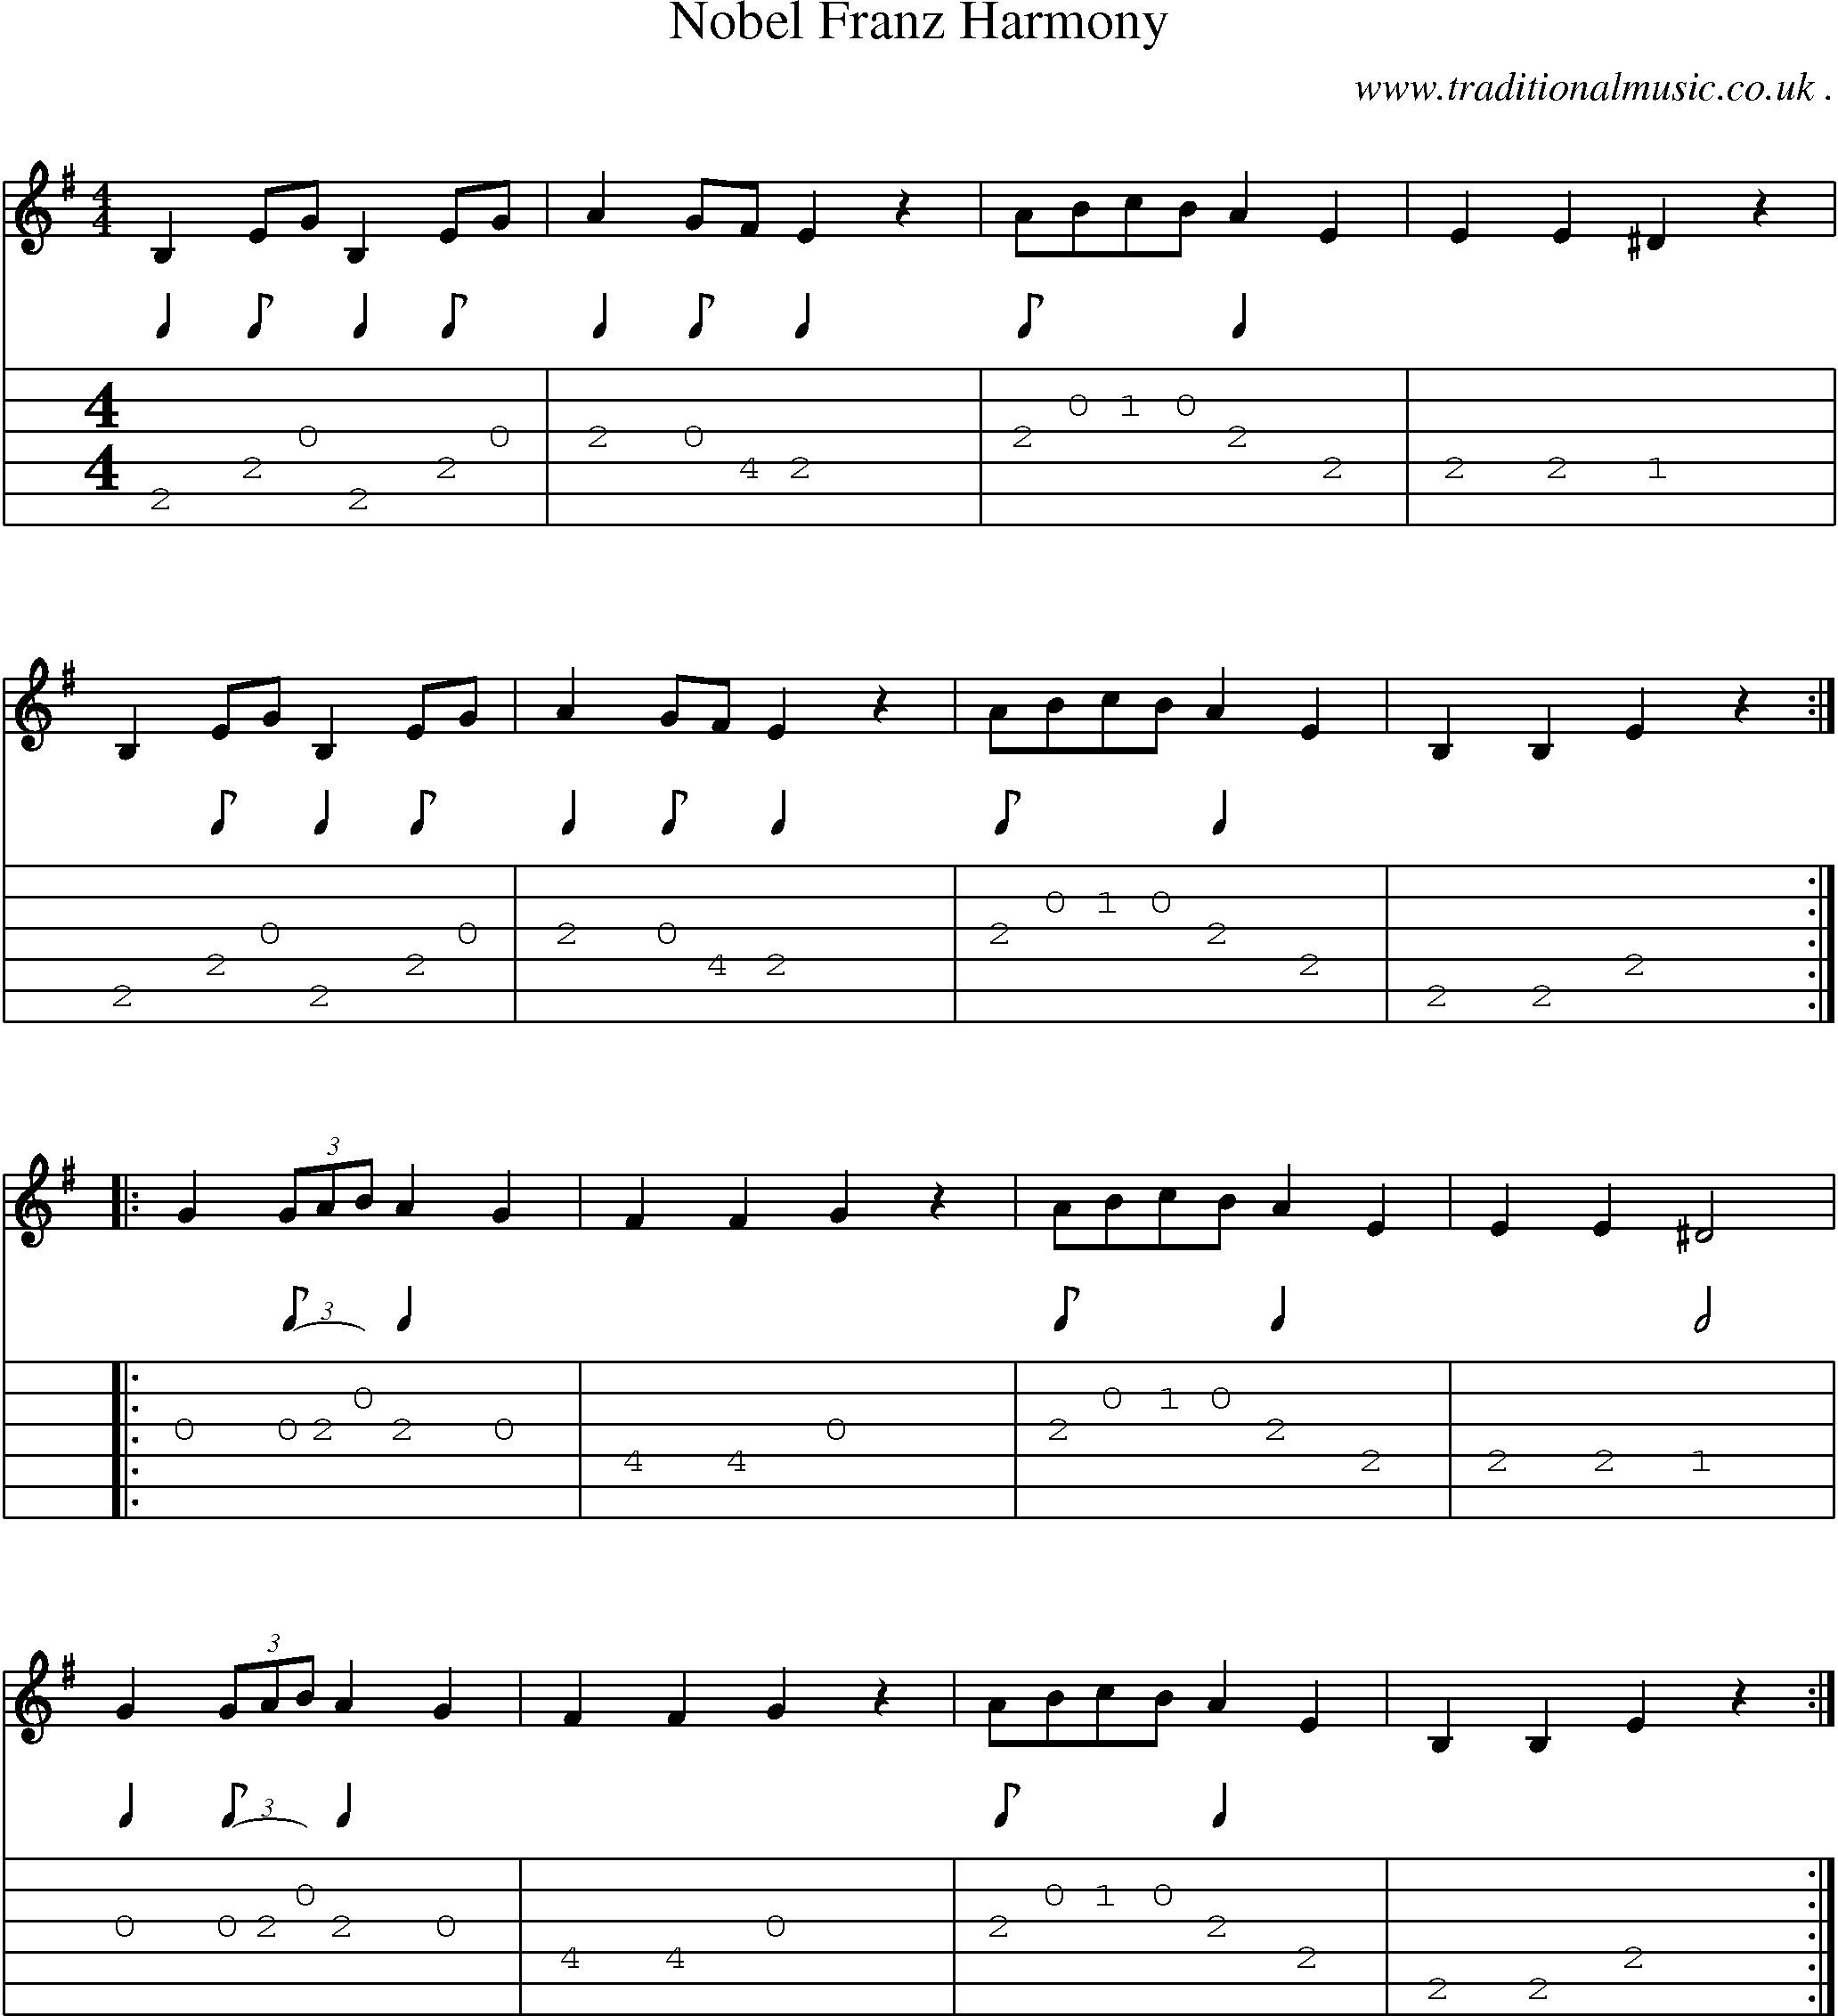 Music Score and Guitar Tabs for Nobel Franz Harmony